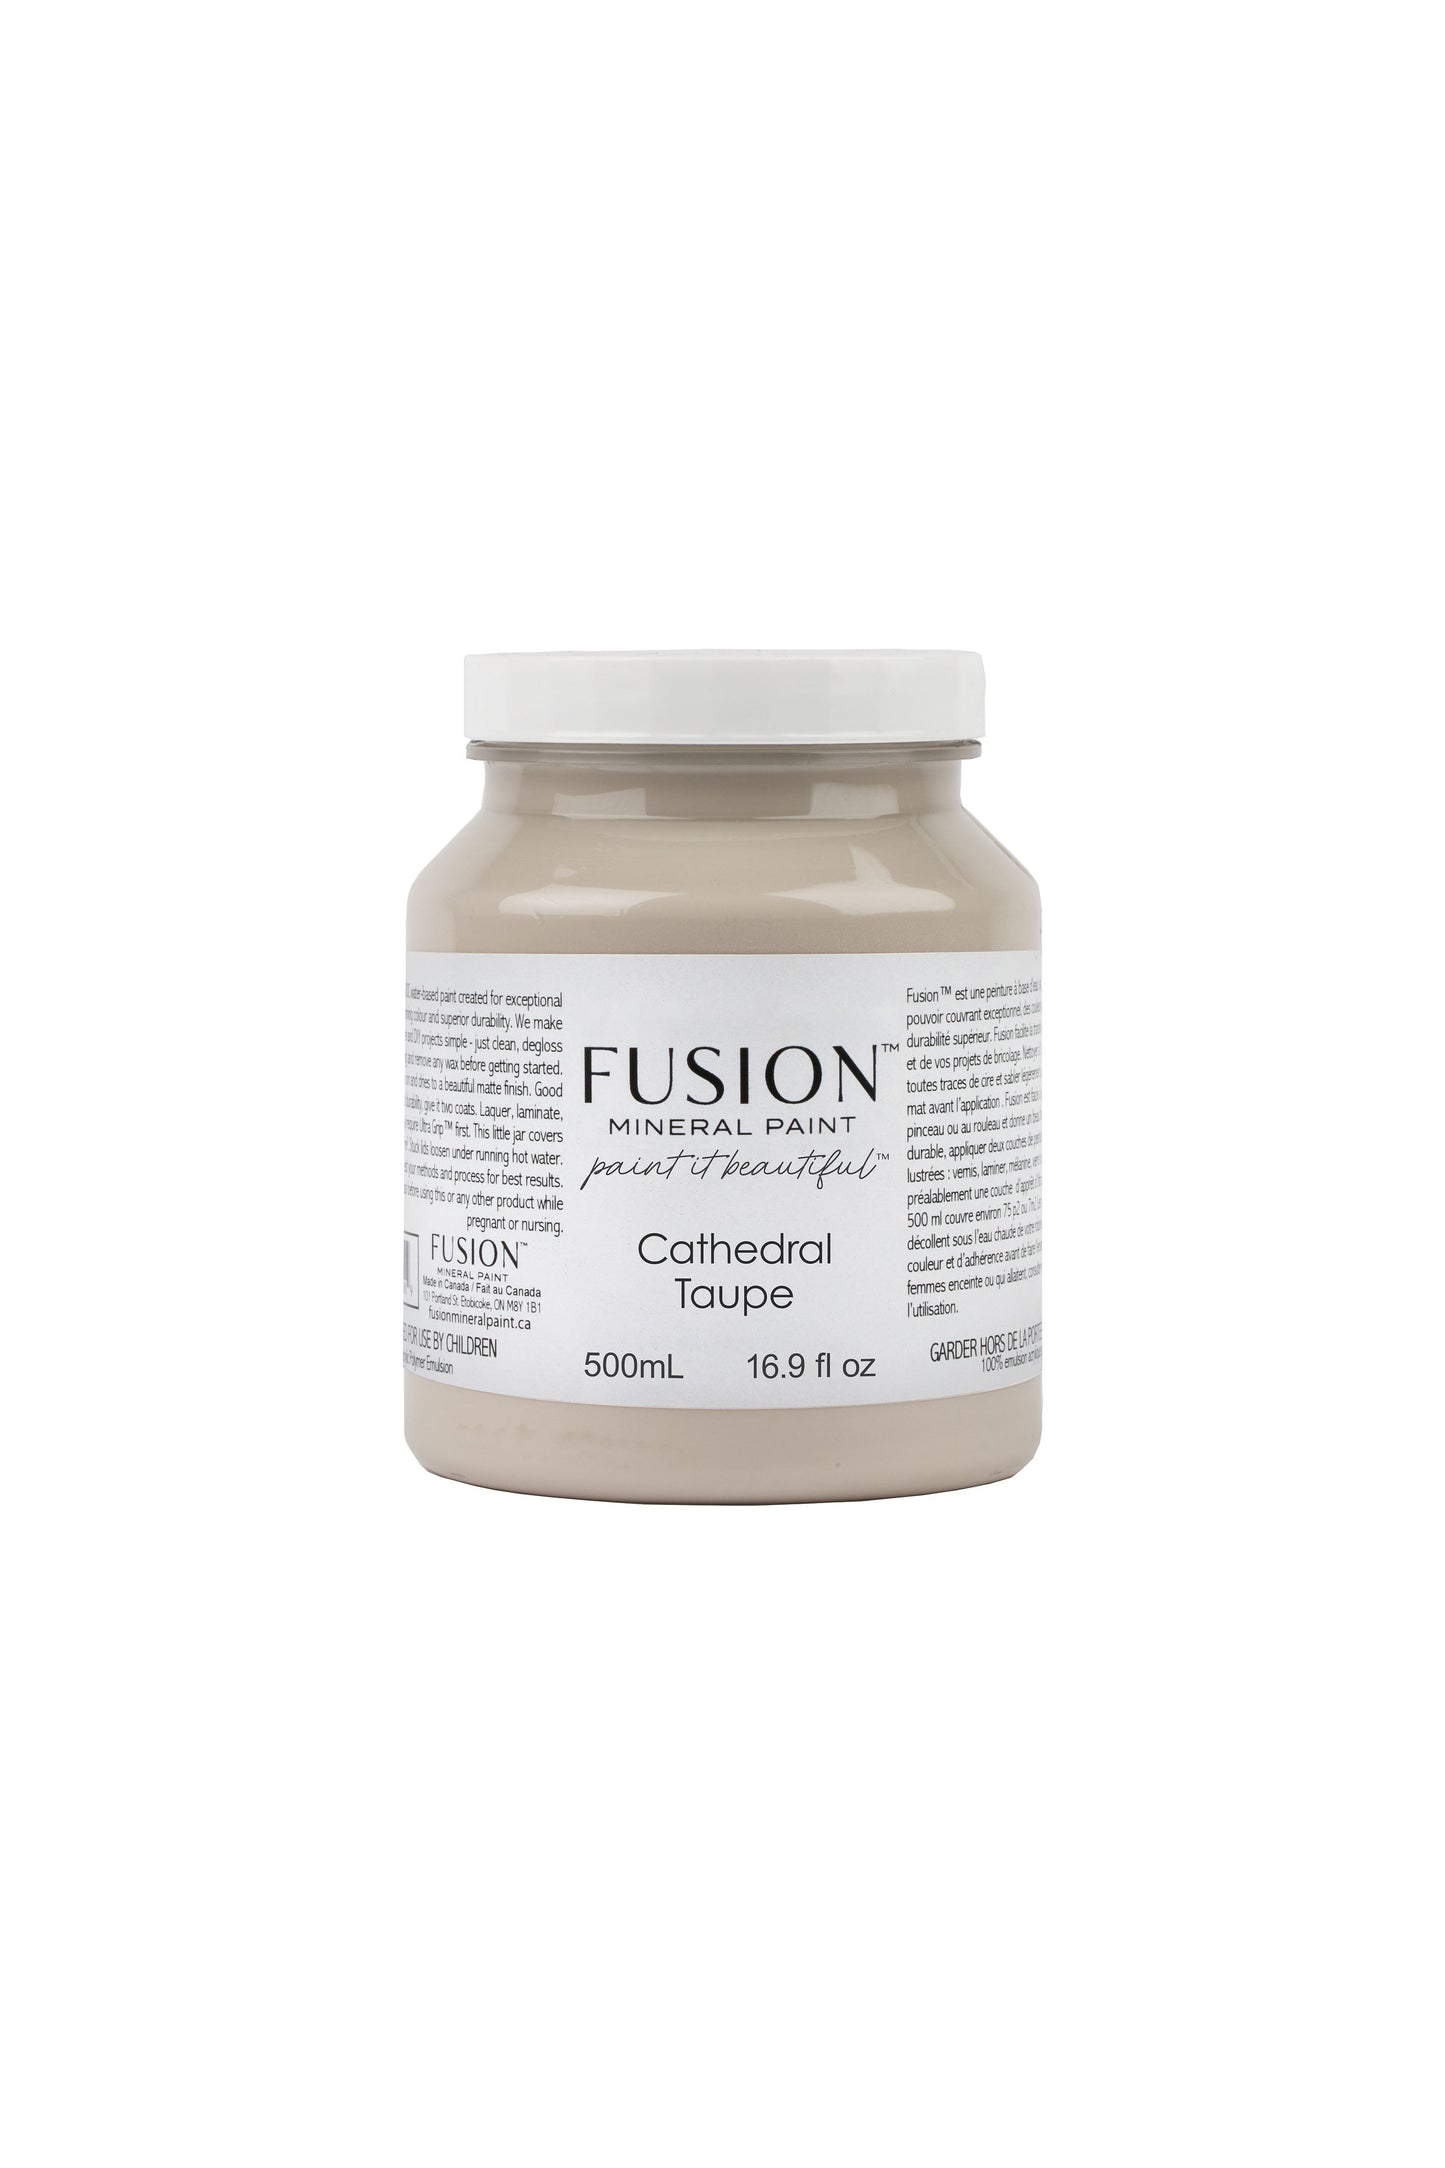 FUSION MINERAL PAINT- Cathedral Taupe